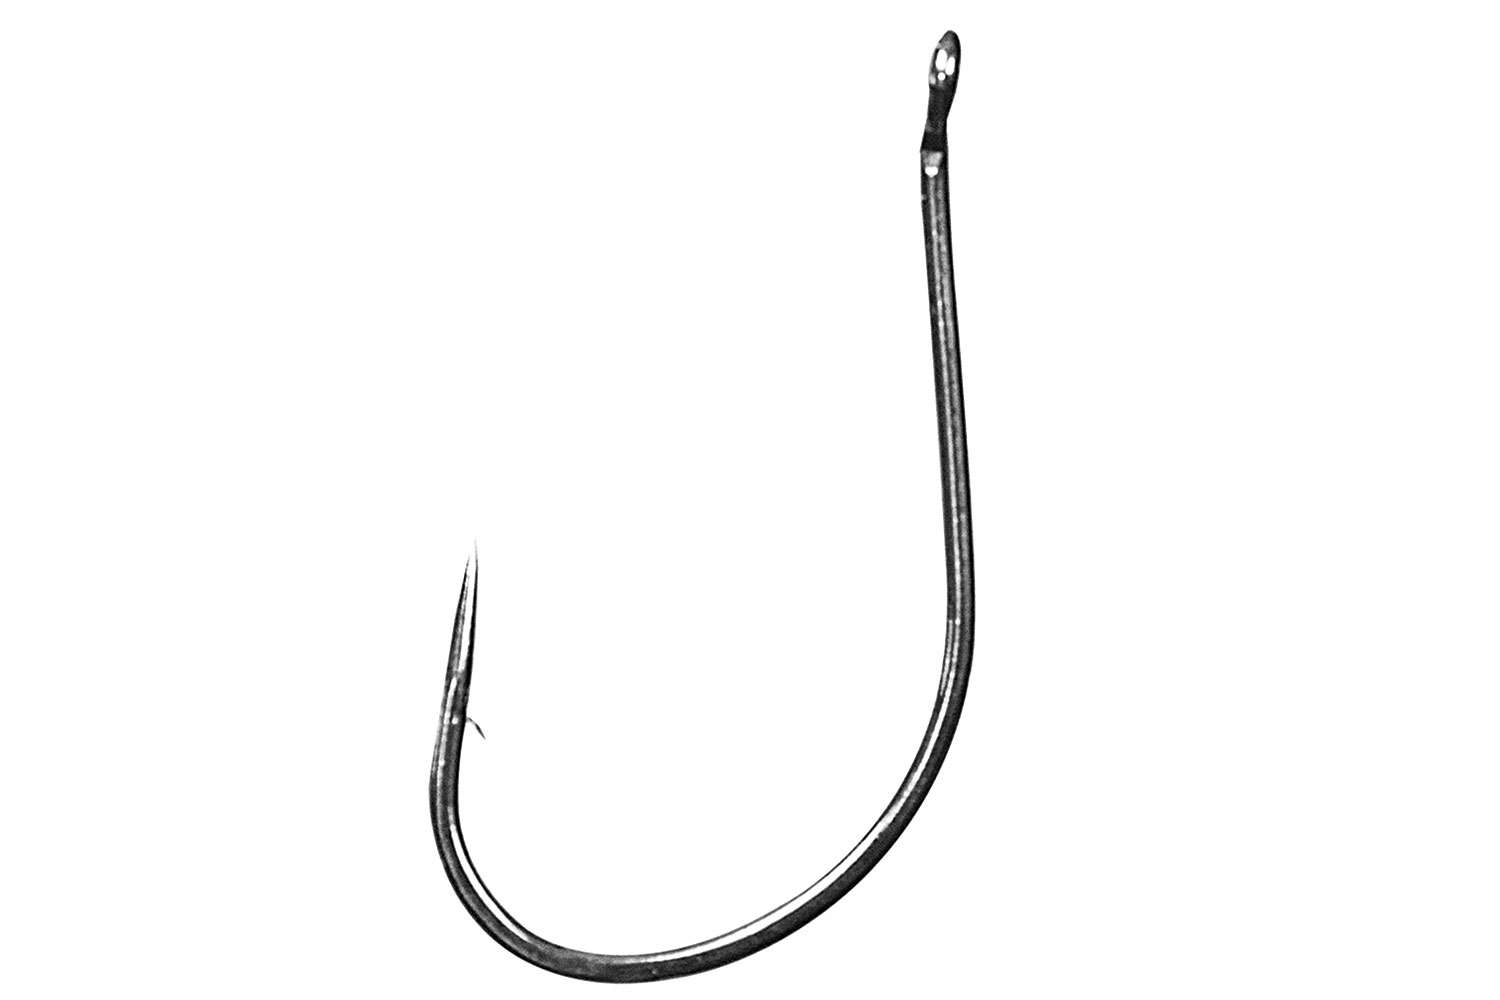     <B>Eagle Claw L6 Drop Shot Hook</B>
<BR>The L6 introduces a drop shot hook with the same great profile as its cousin, the TK150 but with the needlepoint hook point everyday anglers have come to love for its dependability.
<BR>
<B>MSRP: 10-pack for $3.49</B></p>

<p><a href=